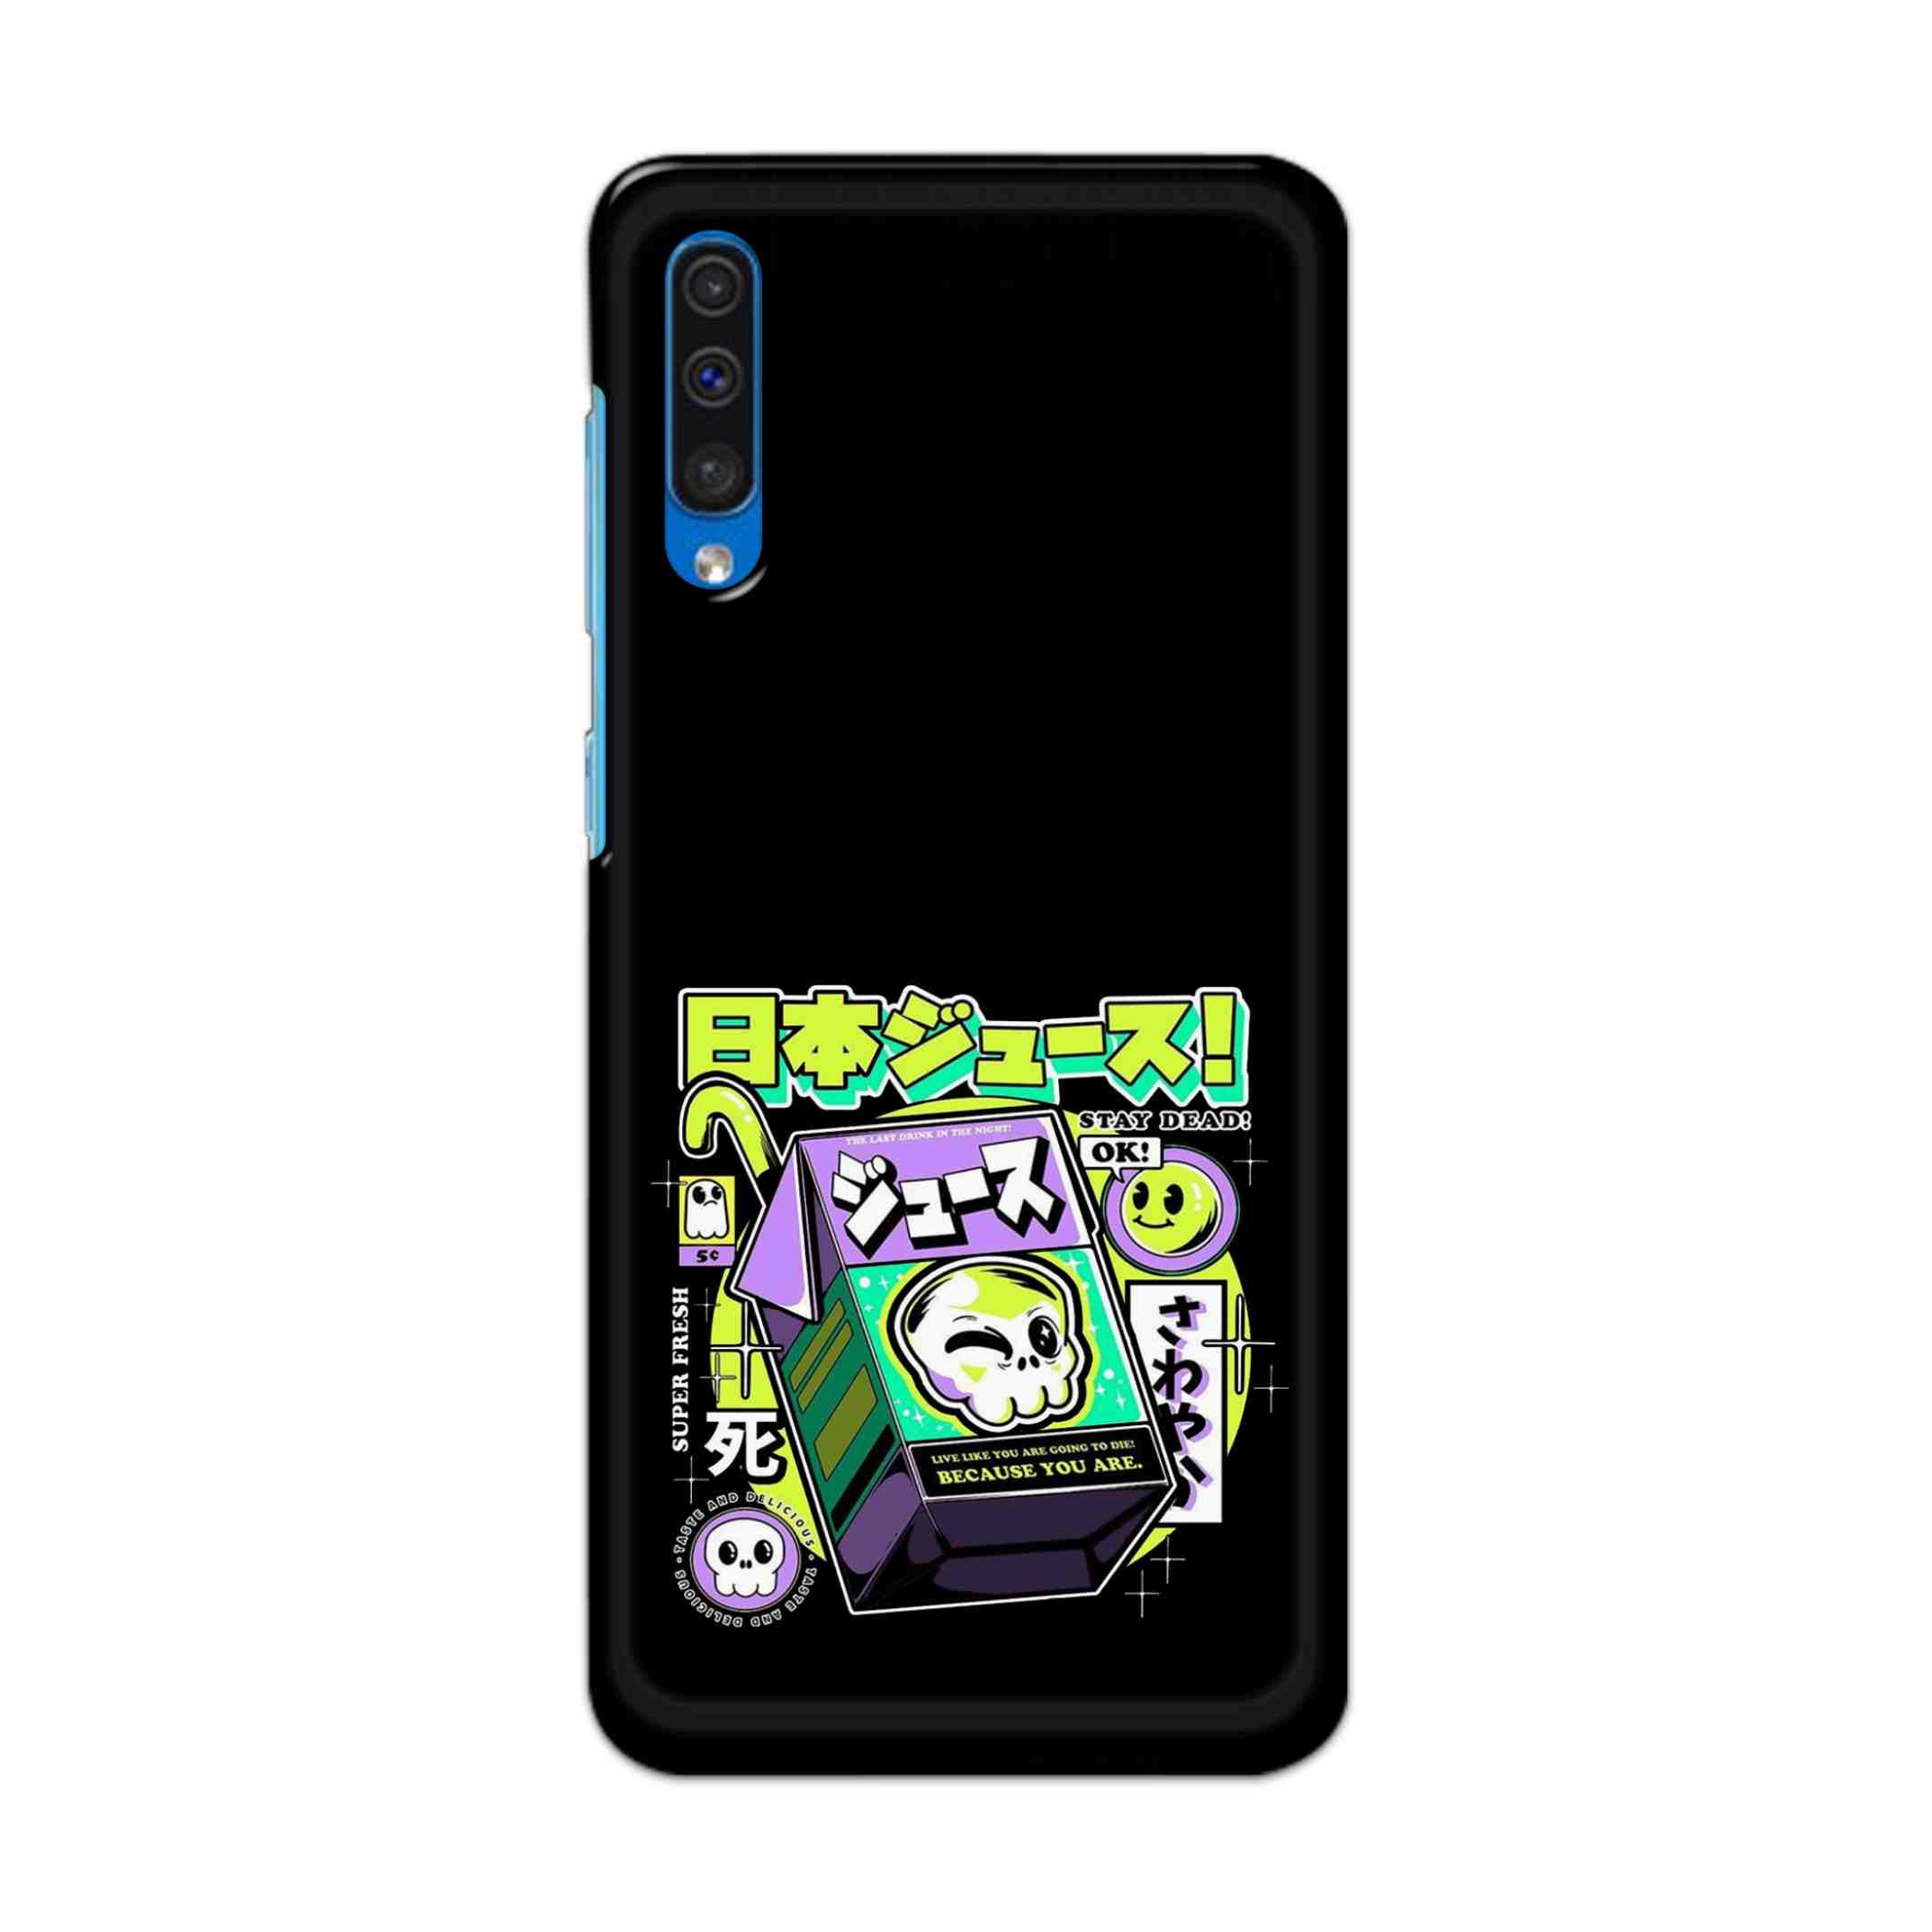 Buy Because You Are Hard Back Mobile Phone Case Cover For Samsung Galaxy A50 / A50s / A30s Online